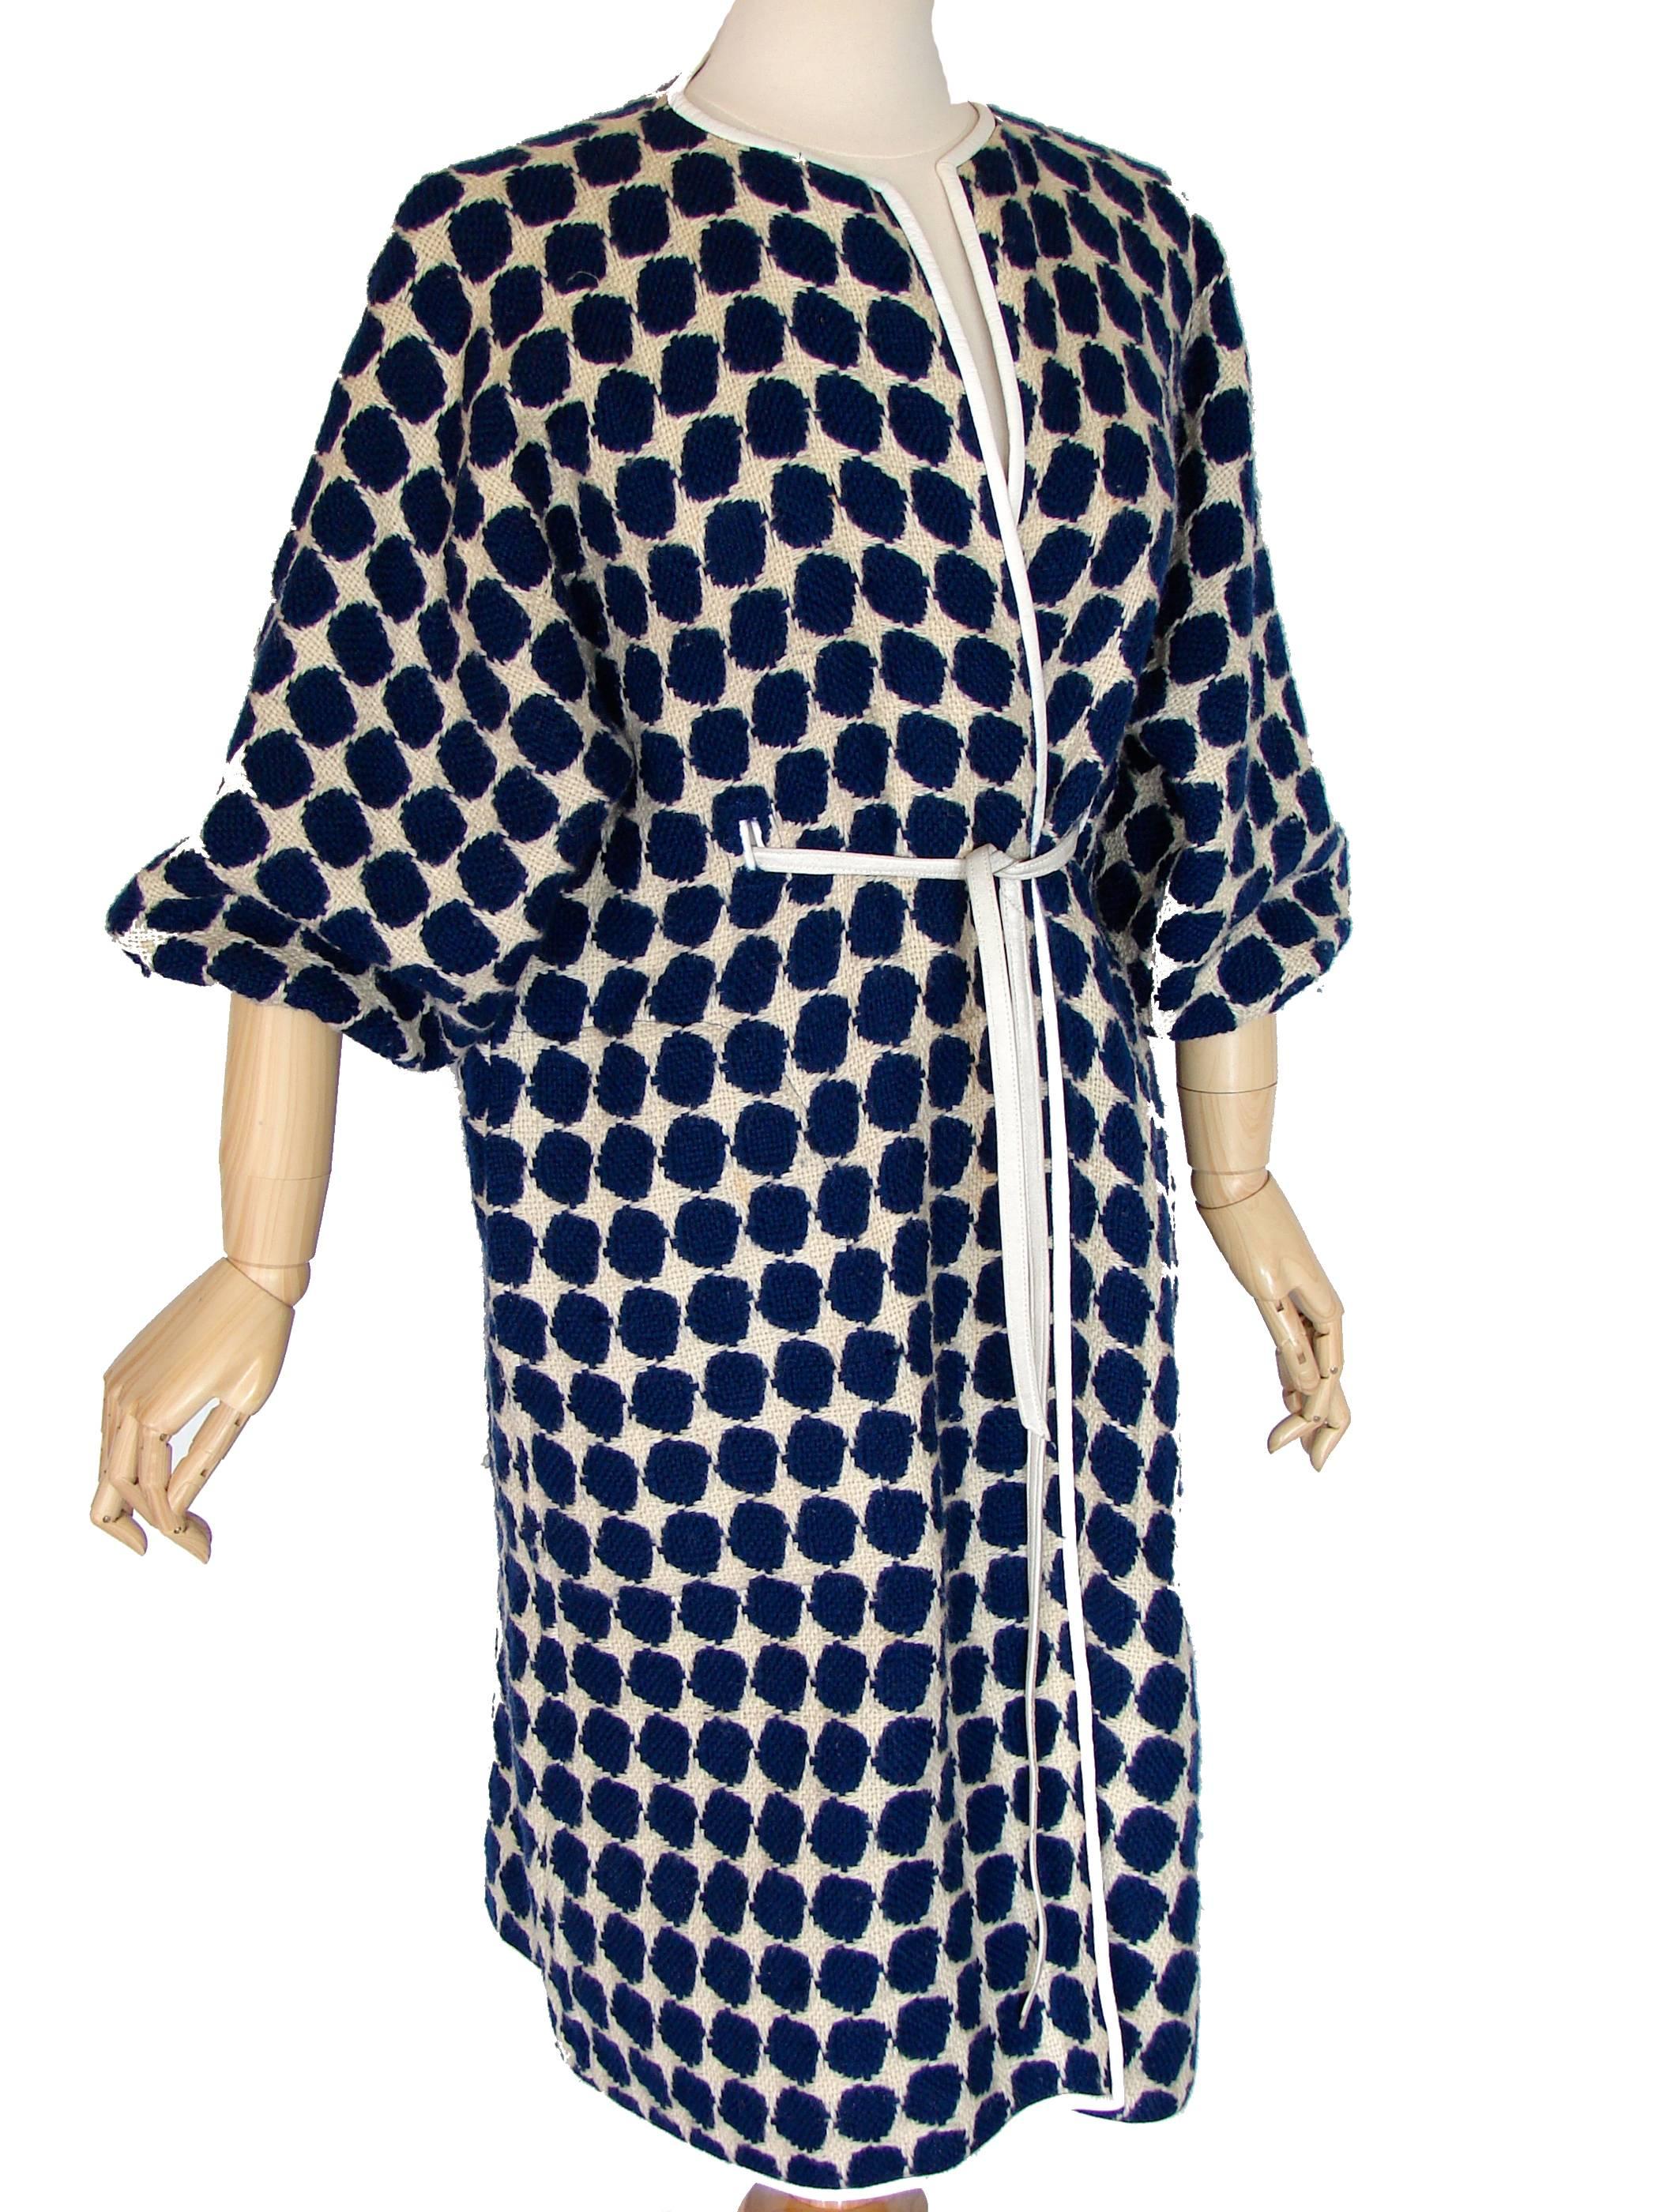 Bonnie Cashin for Sills Op Art Blue White Wool Leather Trim NOH Coat, 1960s  In Good Condition In Port Saint Lucie, FL